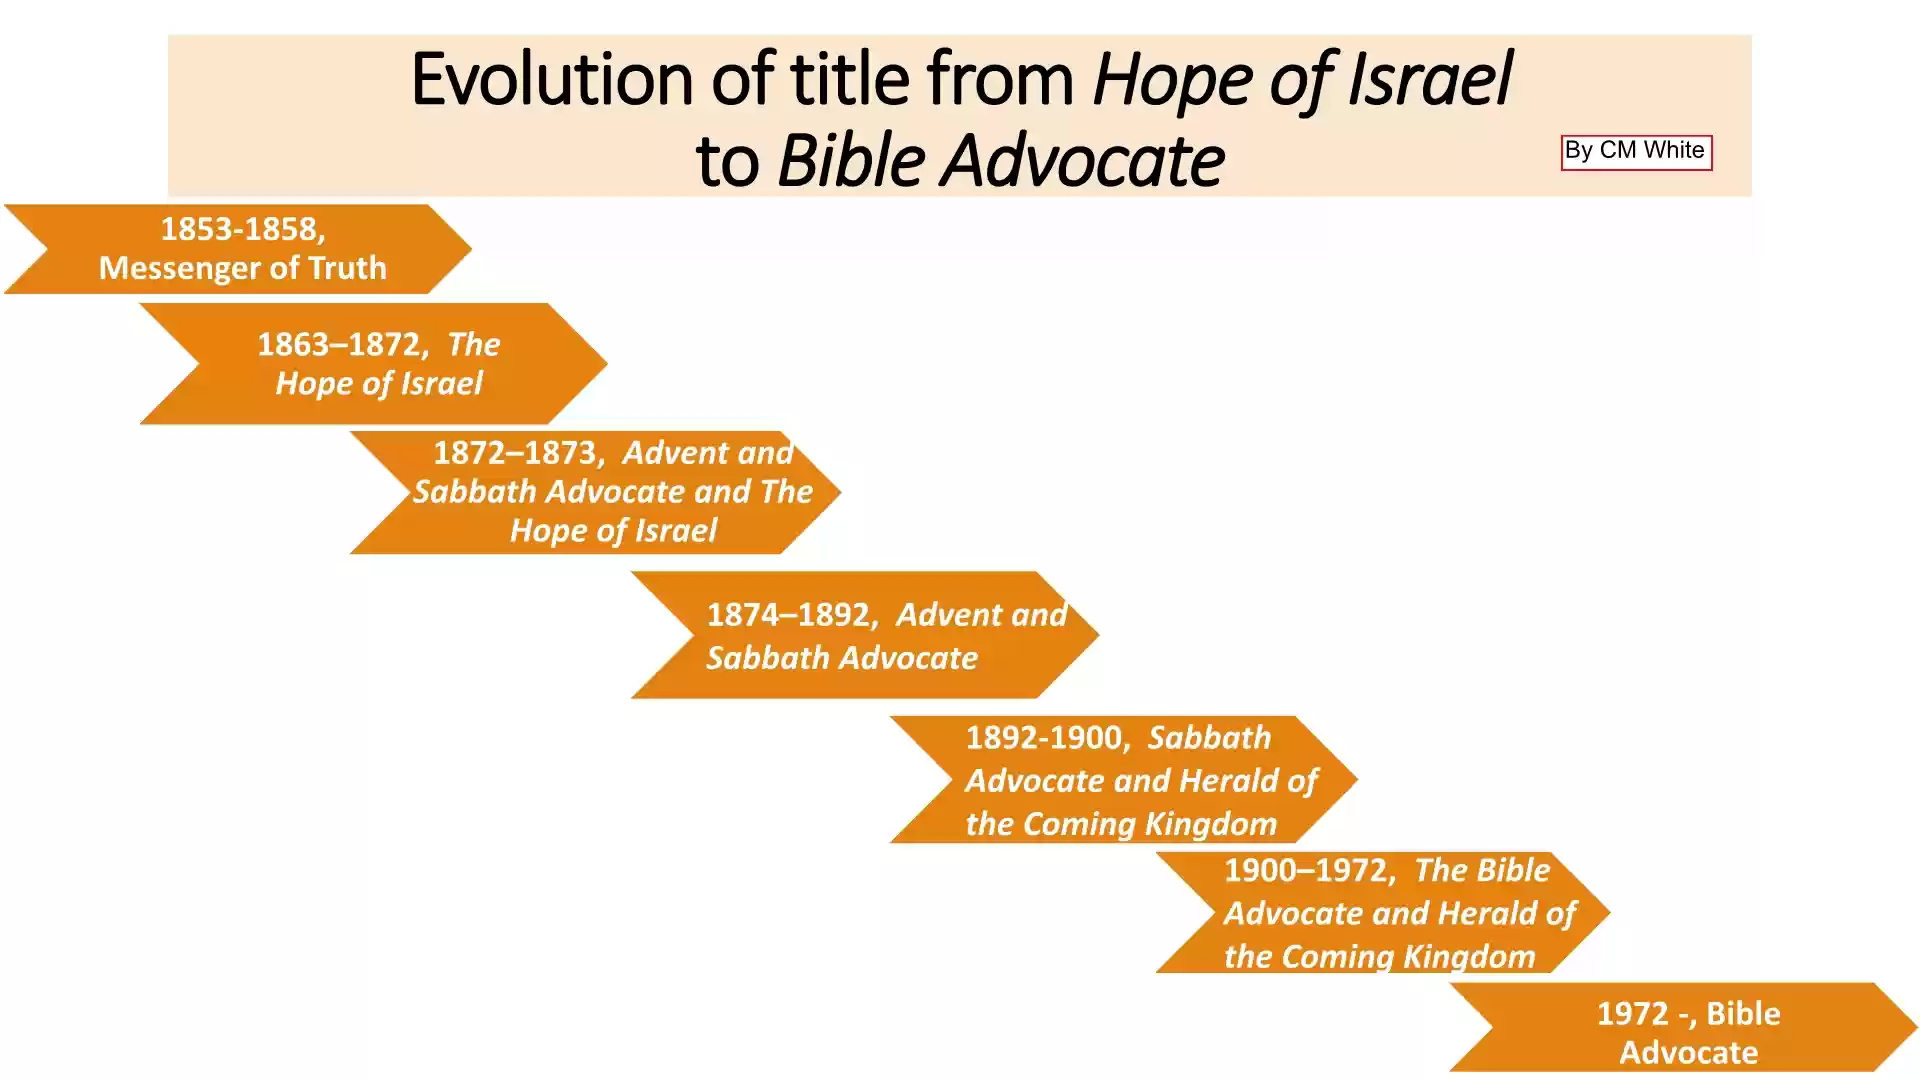 Evolution of the Bible Advocate